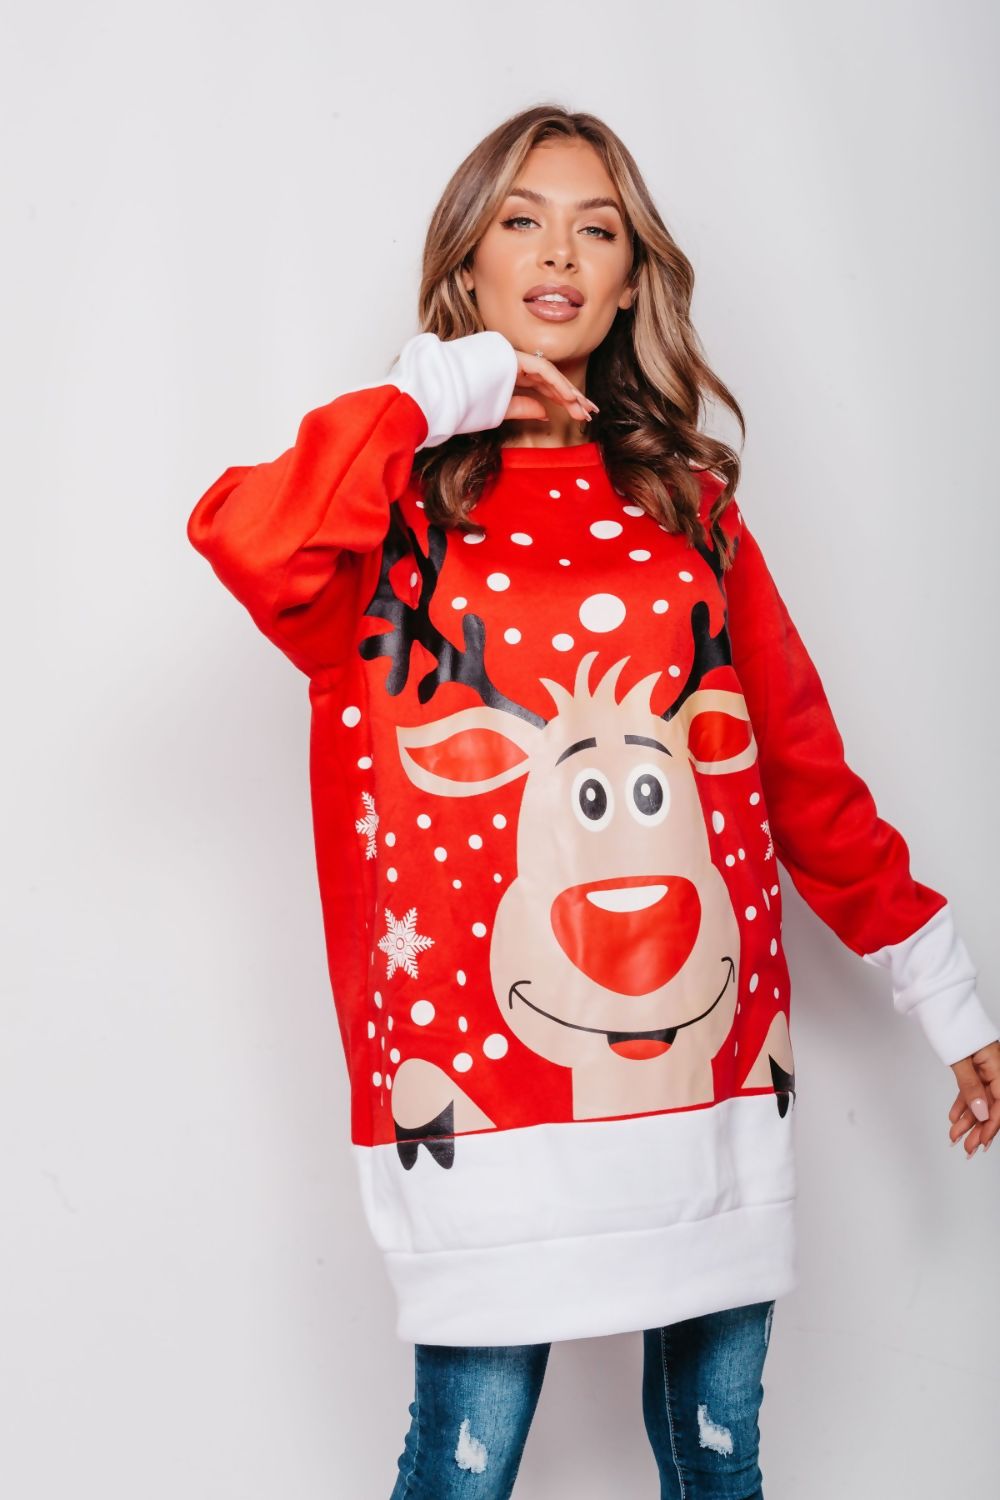 WOMENS NAUGHTY RUDOLPH CHRISTMAS JUMPER DRESS RED